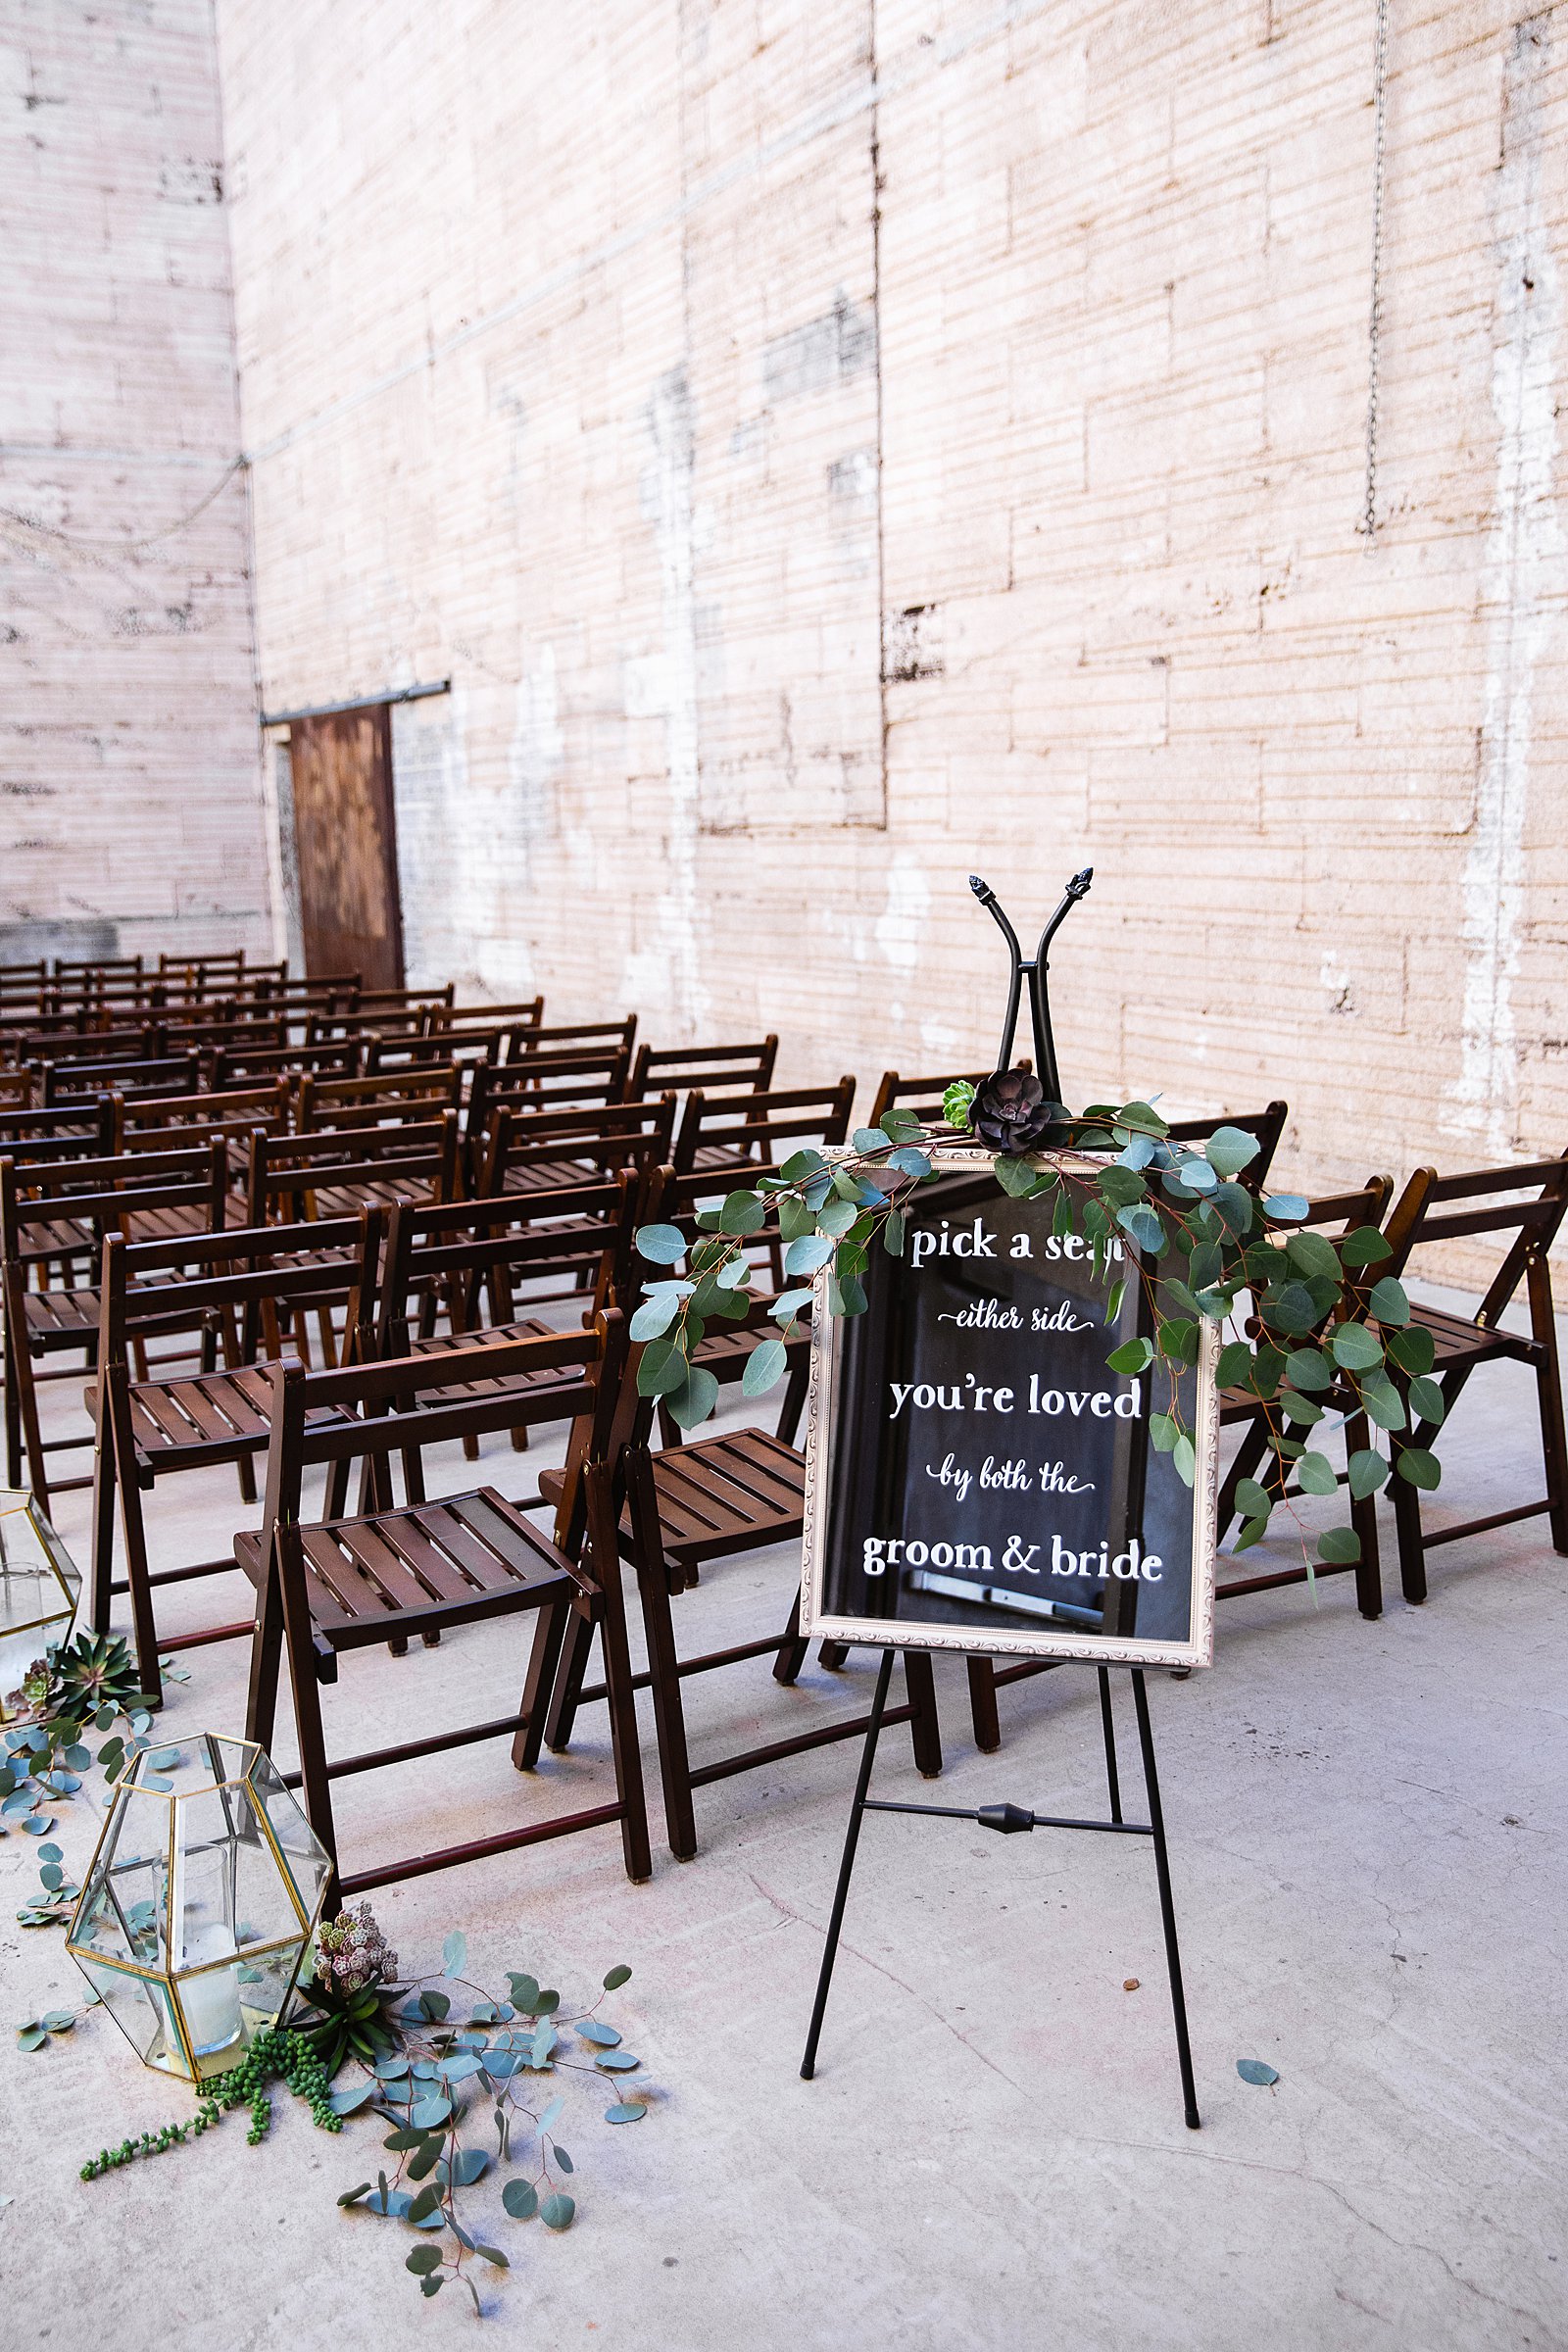 Pick a seat either side wedding ceremony sign at the Ice House wedding venue by Phoenix wedding photography by PMA Photography.